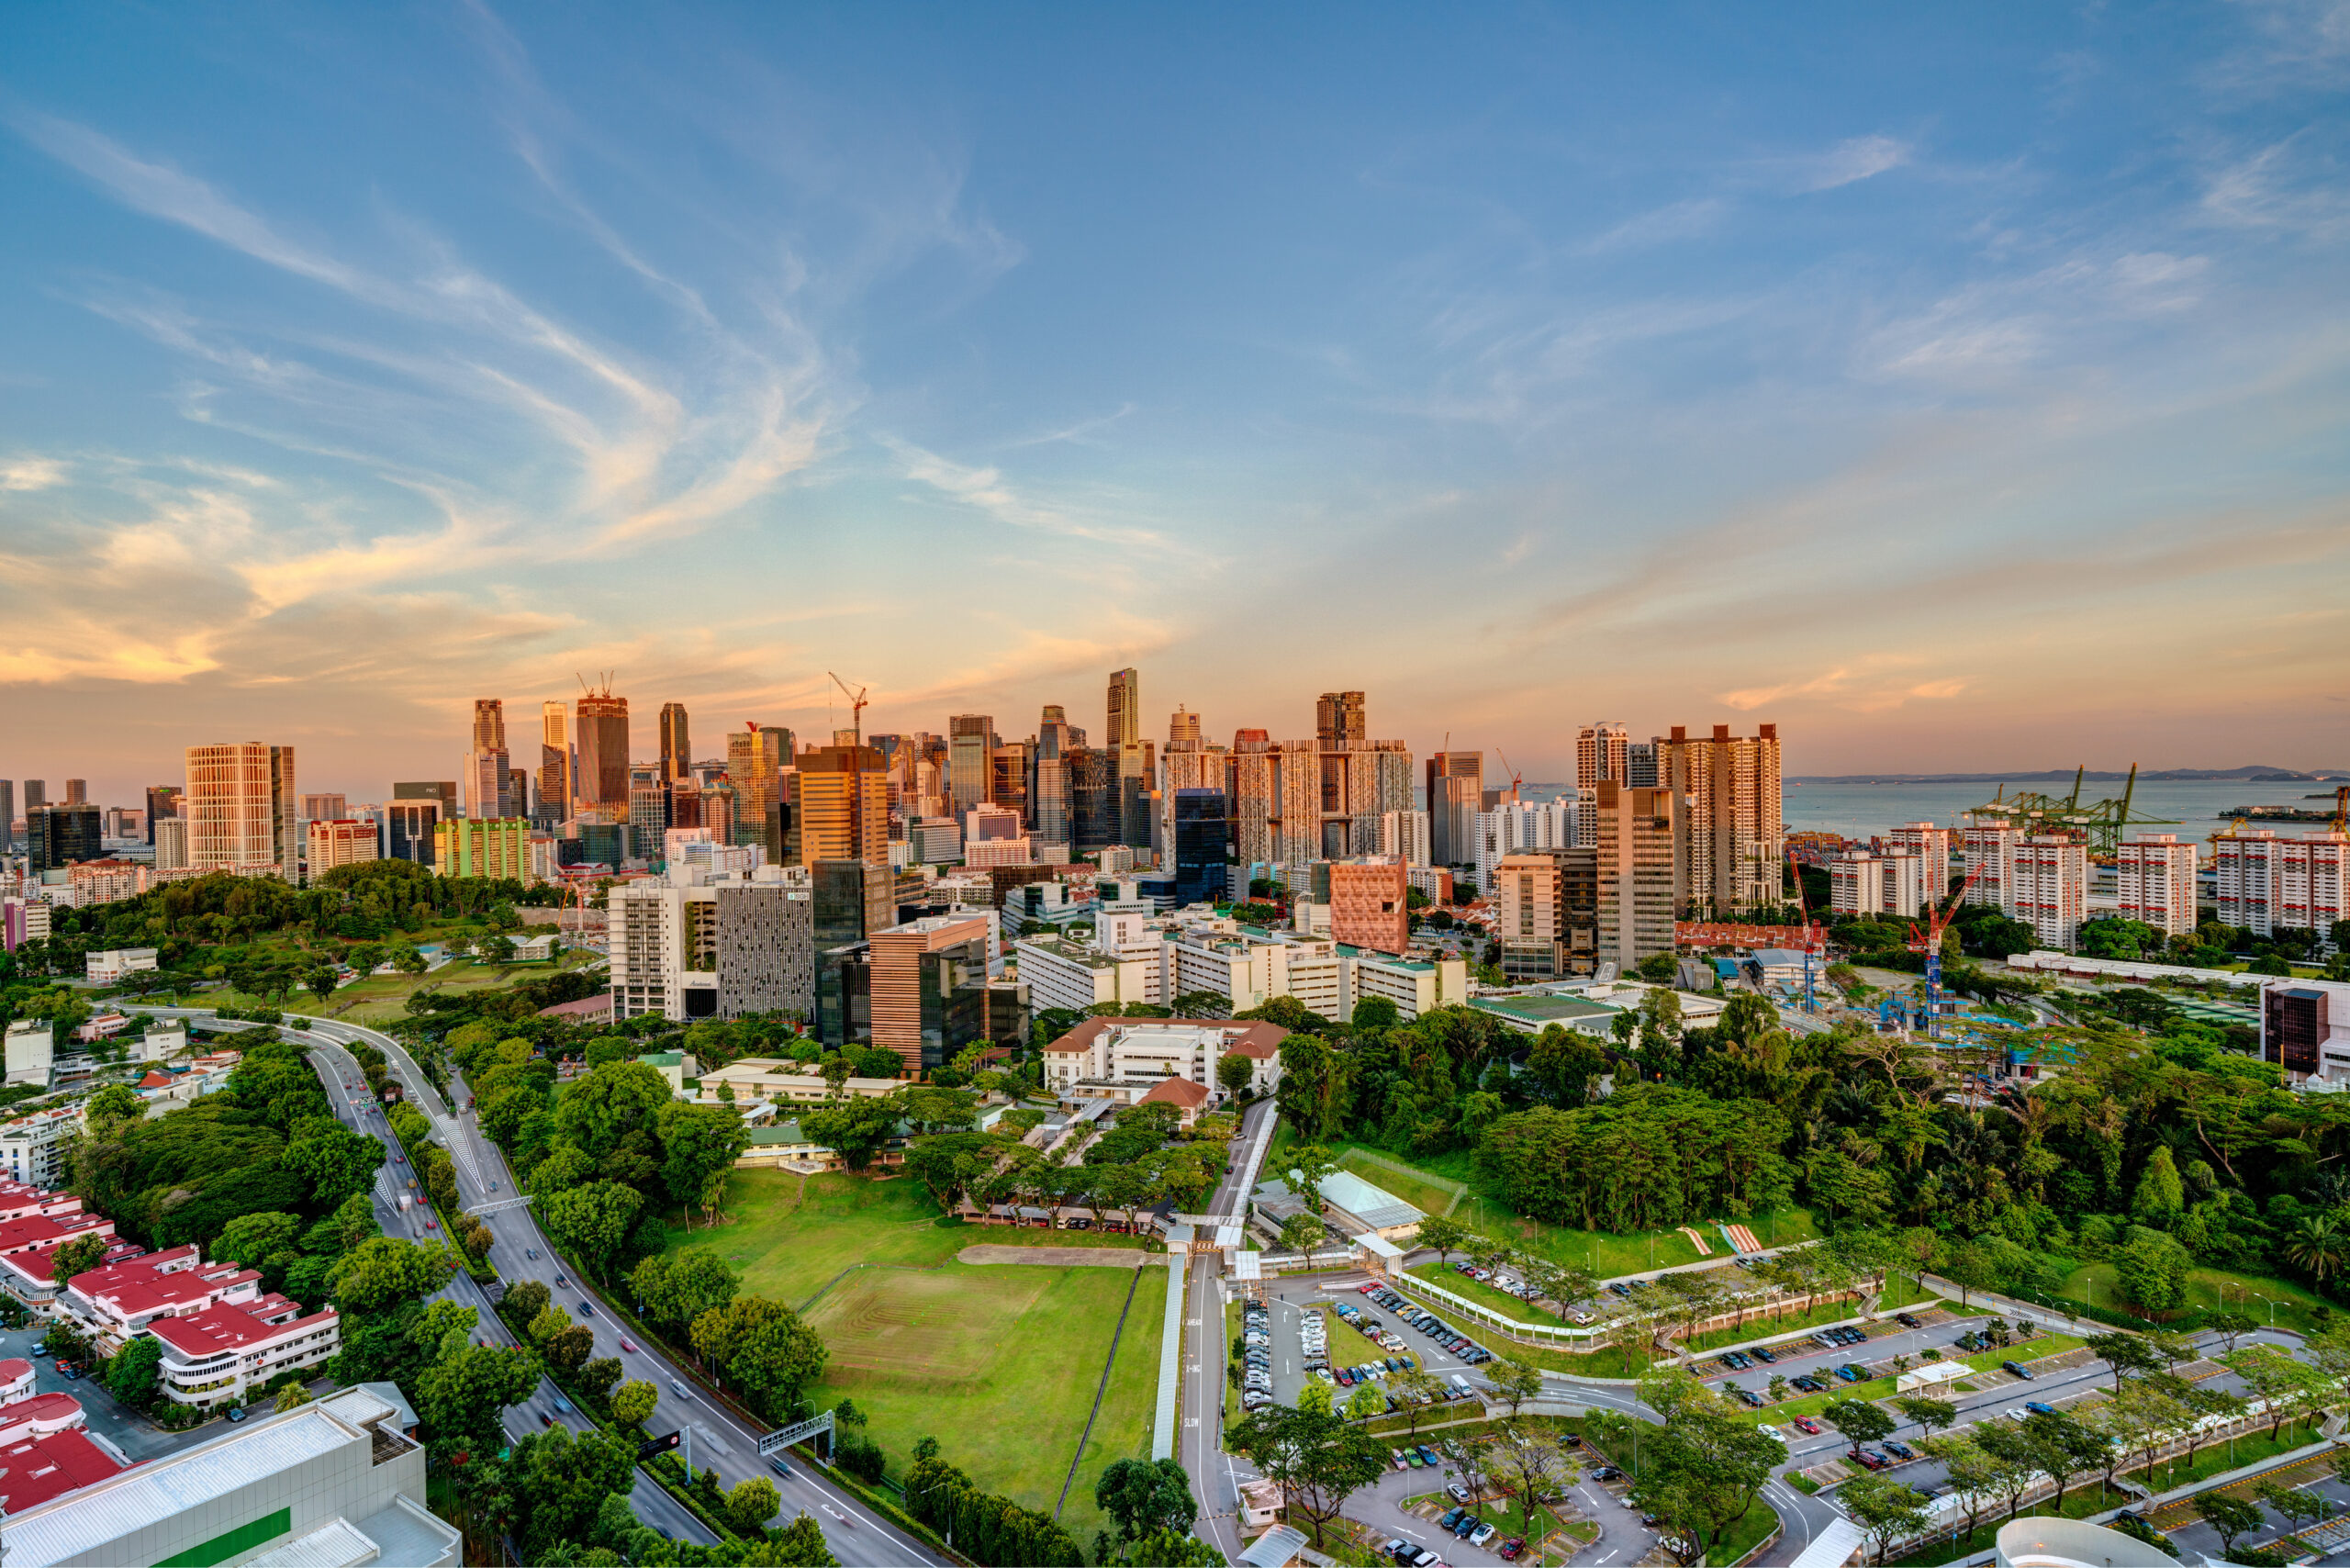 An extreme wide shot of the panoramic skyline of Singapore’s central area, namely Tiong Bahru, at dusk